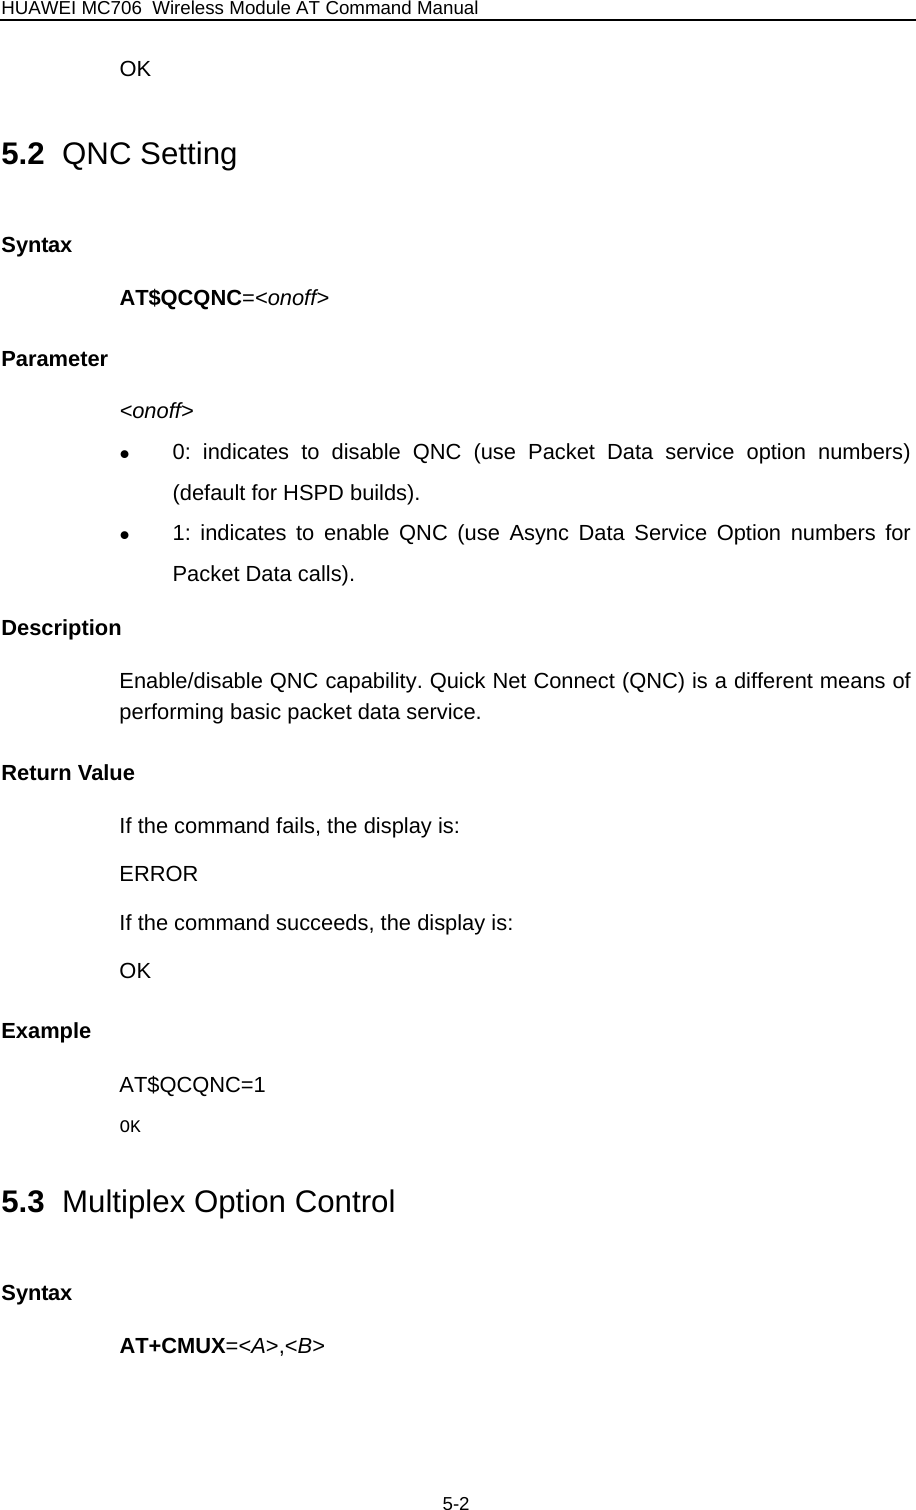 HUAWEI MC706 Wireless Module AT Command Manual OK 5.2  QNC Setting Syntax AT$QCQNC=&lt;onoff&gt; Parameter &lt;onoff&gt; z 0: indicates to disable QNC (use Packet Data service option numbers) (default for HSPD builds). z 1: indicates to enable QNC (use Async Data Service Option numbers for Packet Data calls). Description Enable/disable QNC capability. Quick Net Connect (QNC) is a different means of performing basic packet data service. Return Value If the command fails, the display is: ERROR If the command succeeds, the display is: OK Example AT$QCQNC=1 OK 5.3  Multiplex Option Control Syntax AT+CMUX=&lt;A&gt;,&lt;B&gt; 5-2 